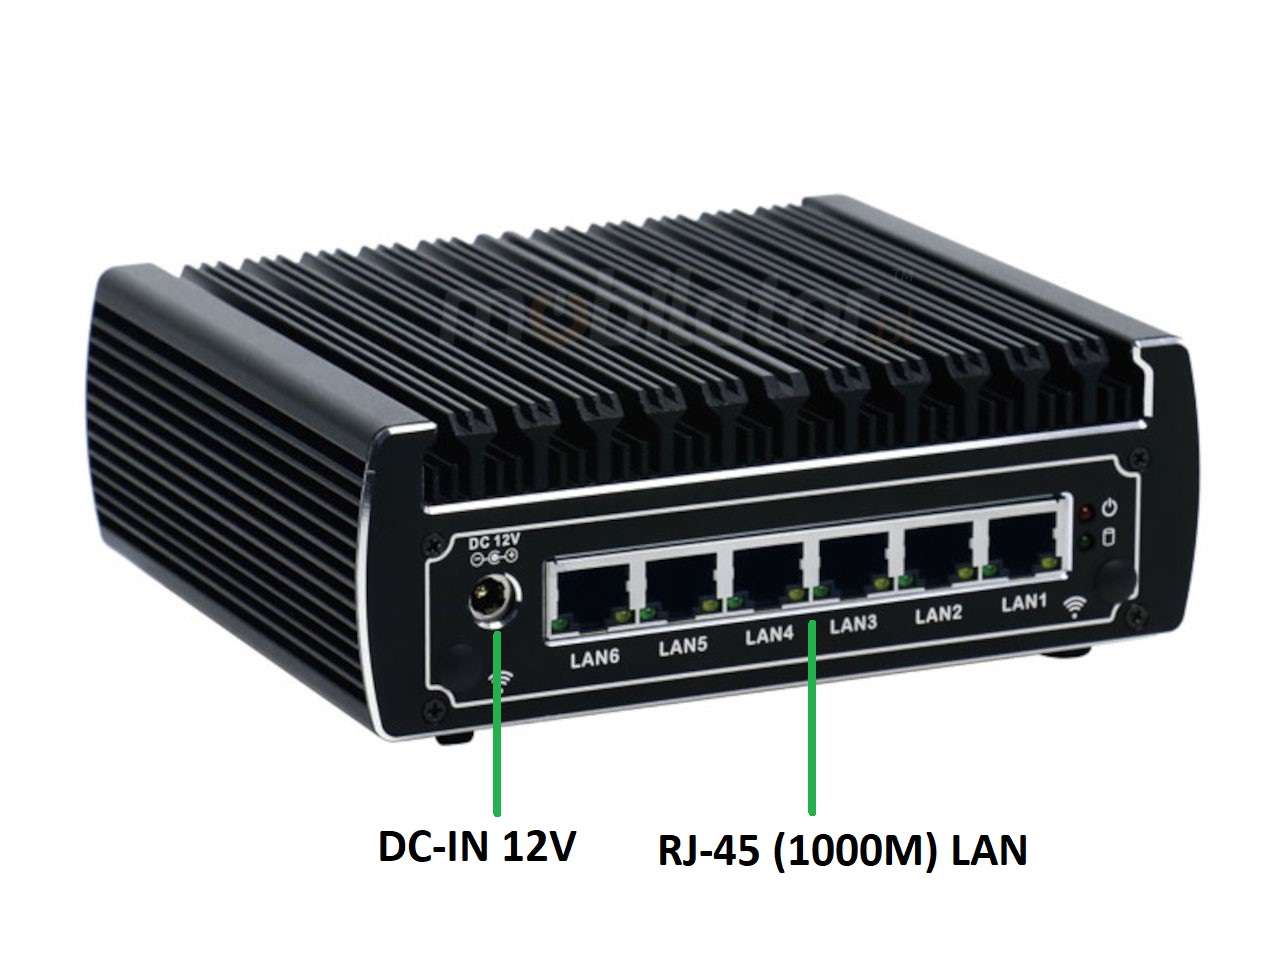  IBOX N133 v.17, back IO, industrial small fast reliable fanless industrial small LAN INTEL i3 HDD SSD DDR4 WIFI BLUETOOTH